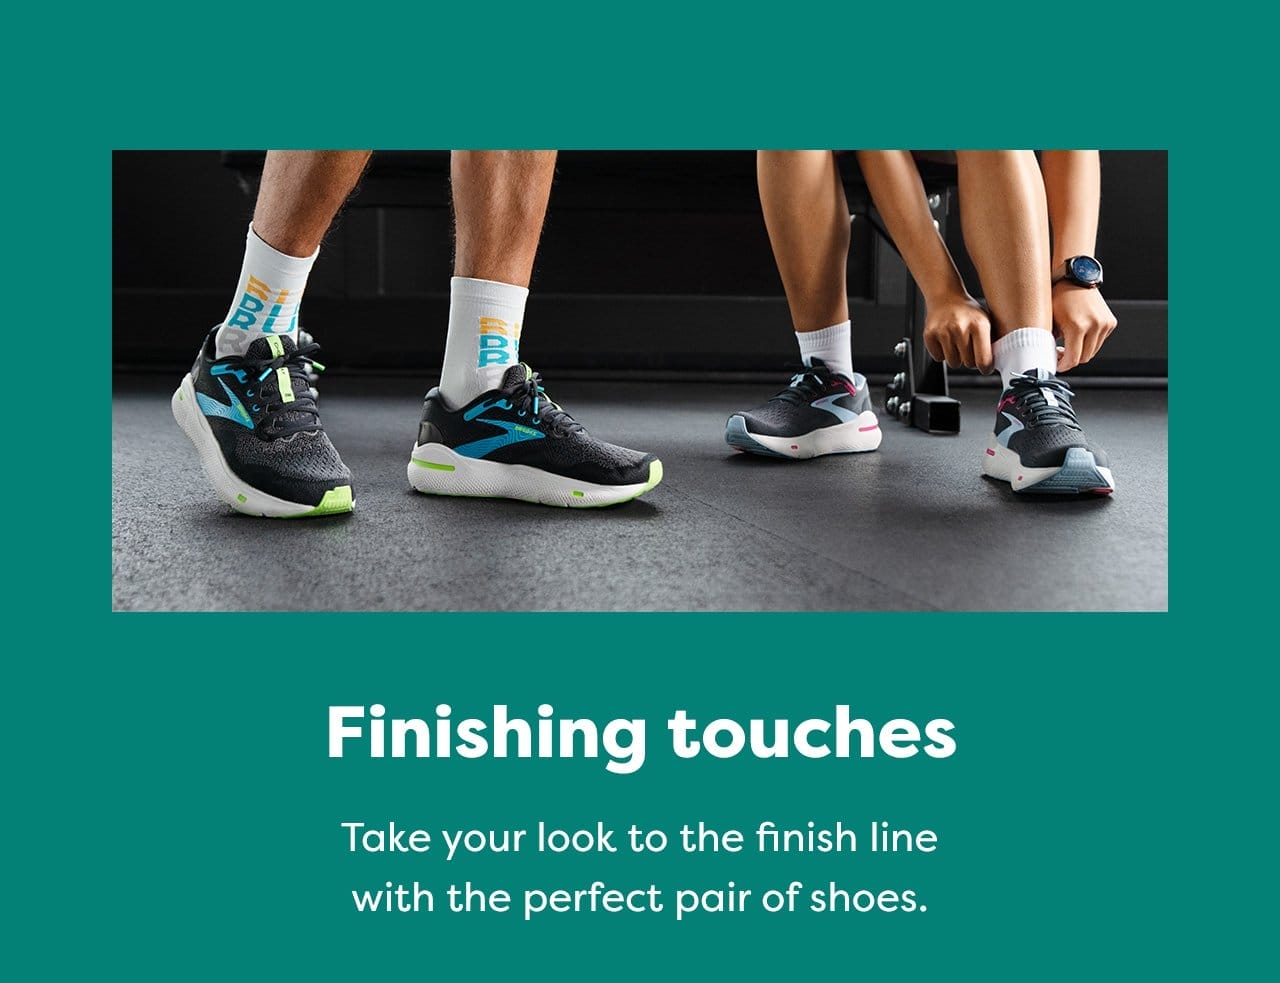 Finishing touches - Take your look to the finish line with the perfect pair of shoes.